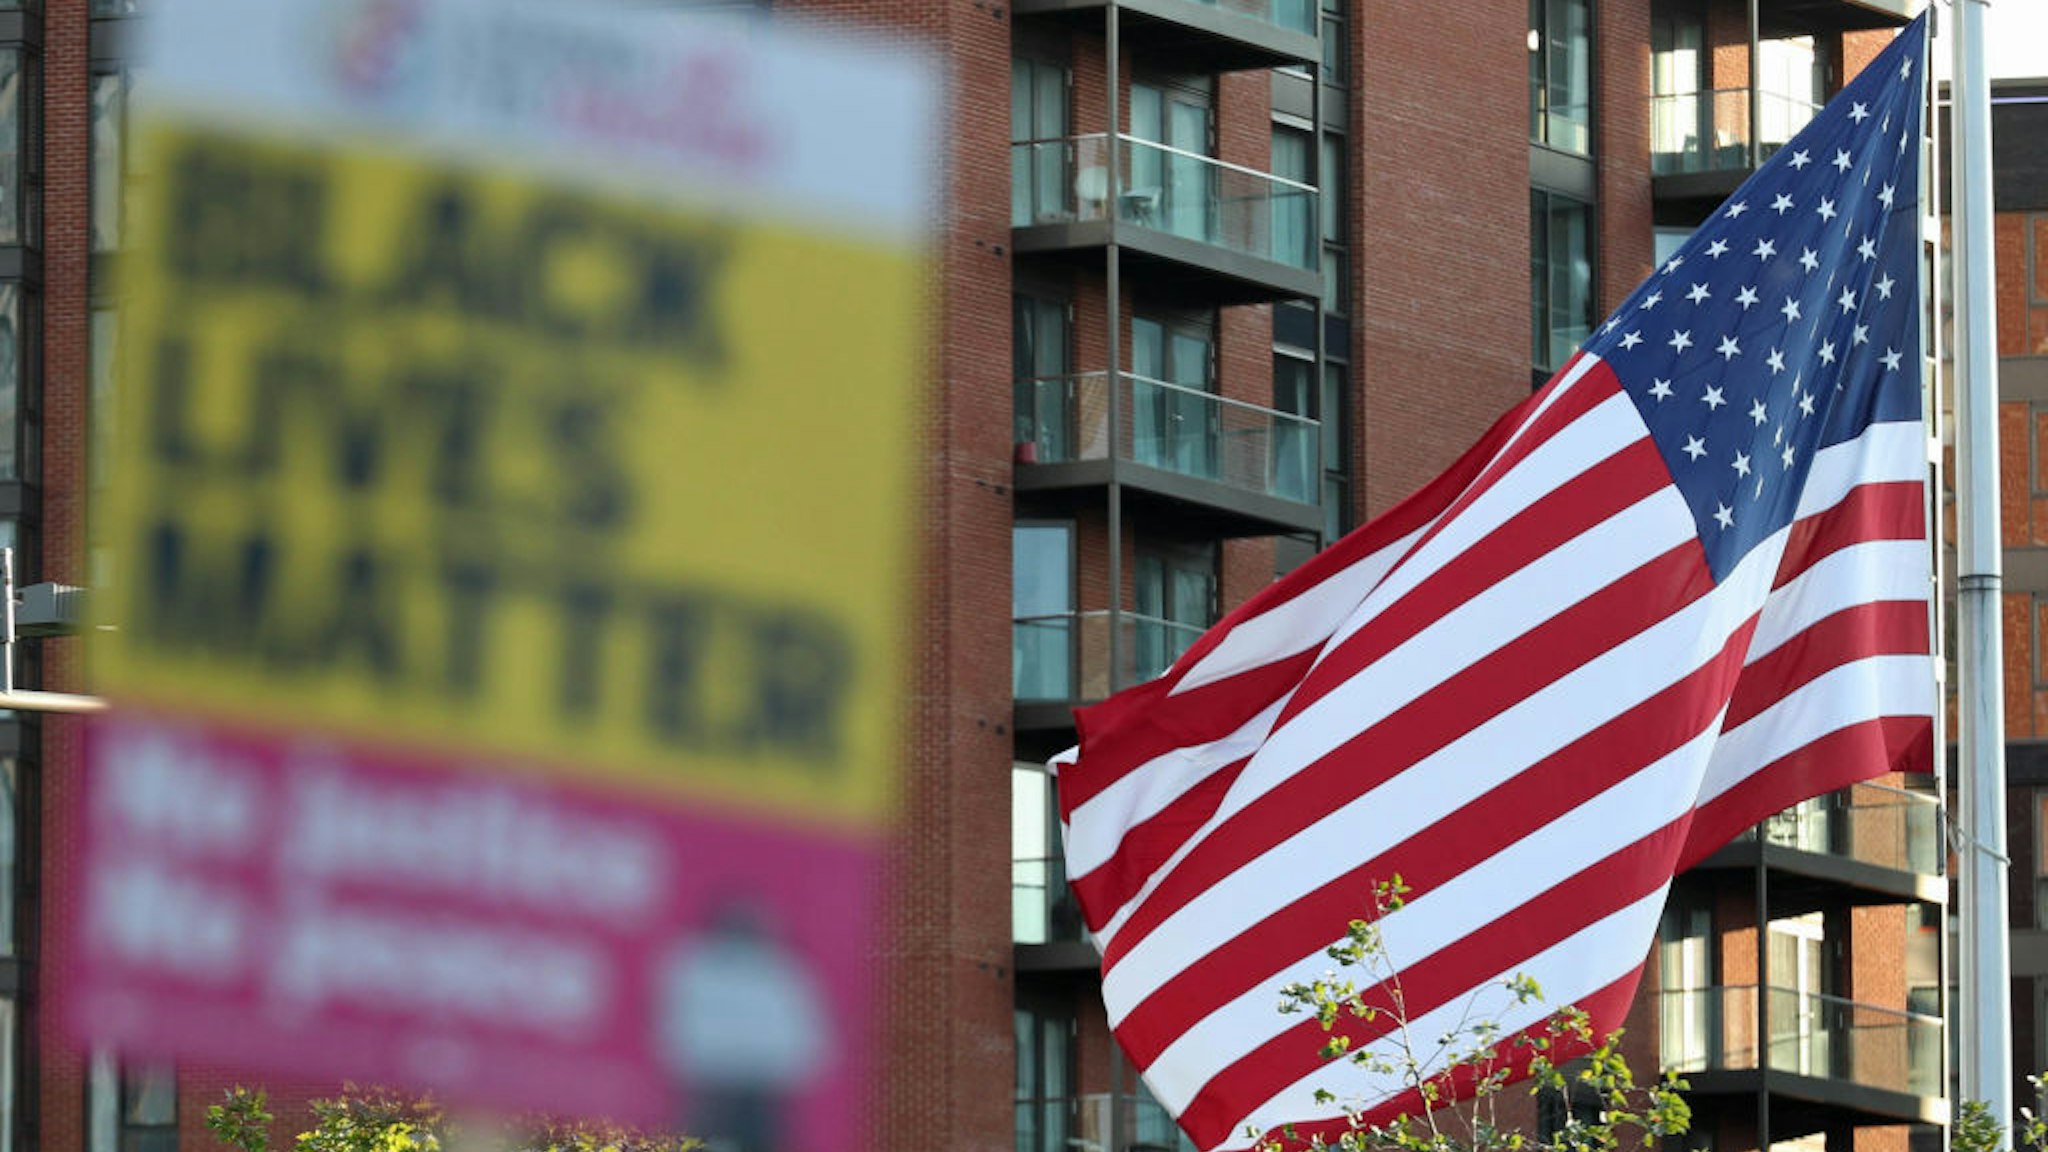 Black Lives Matter placard alongside the American flag during an anti-racism demonstration coinciding with the start of the trial of the four police officers charged with the murder of George Floyd in the US. (Photo by Yui Mok/PA Images via Getty Images)